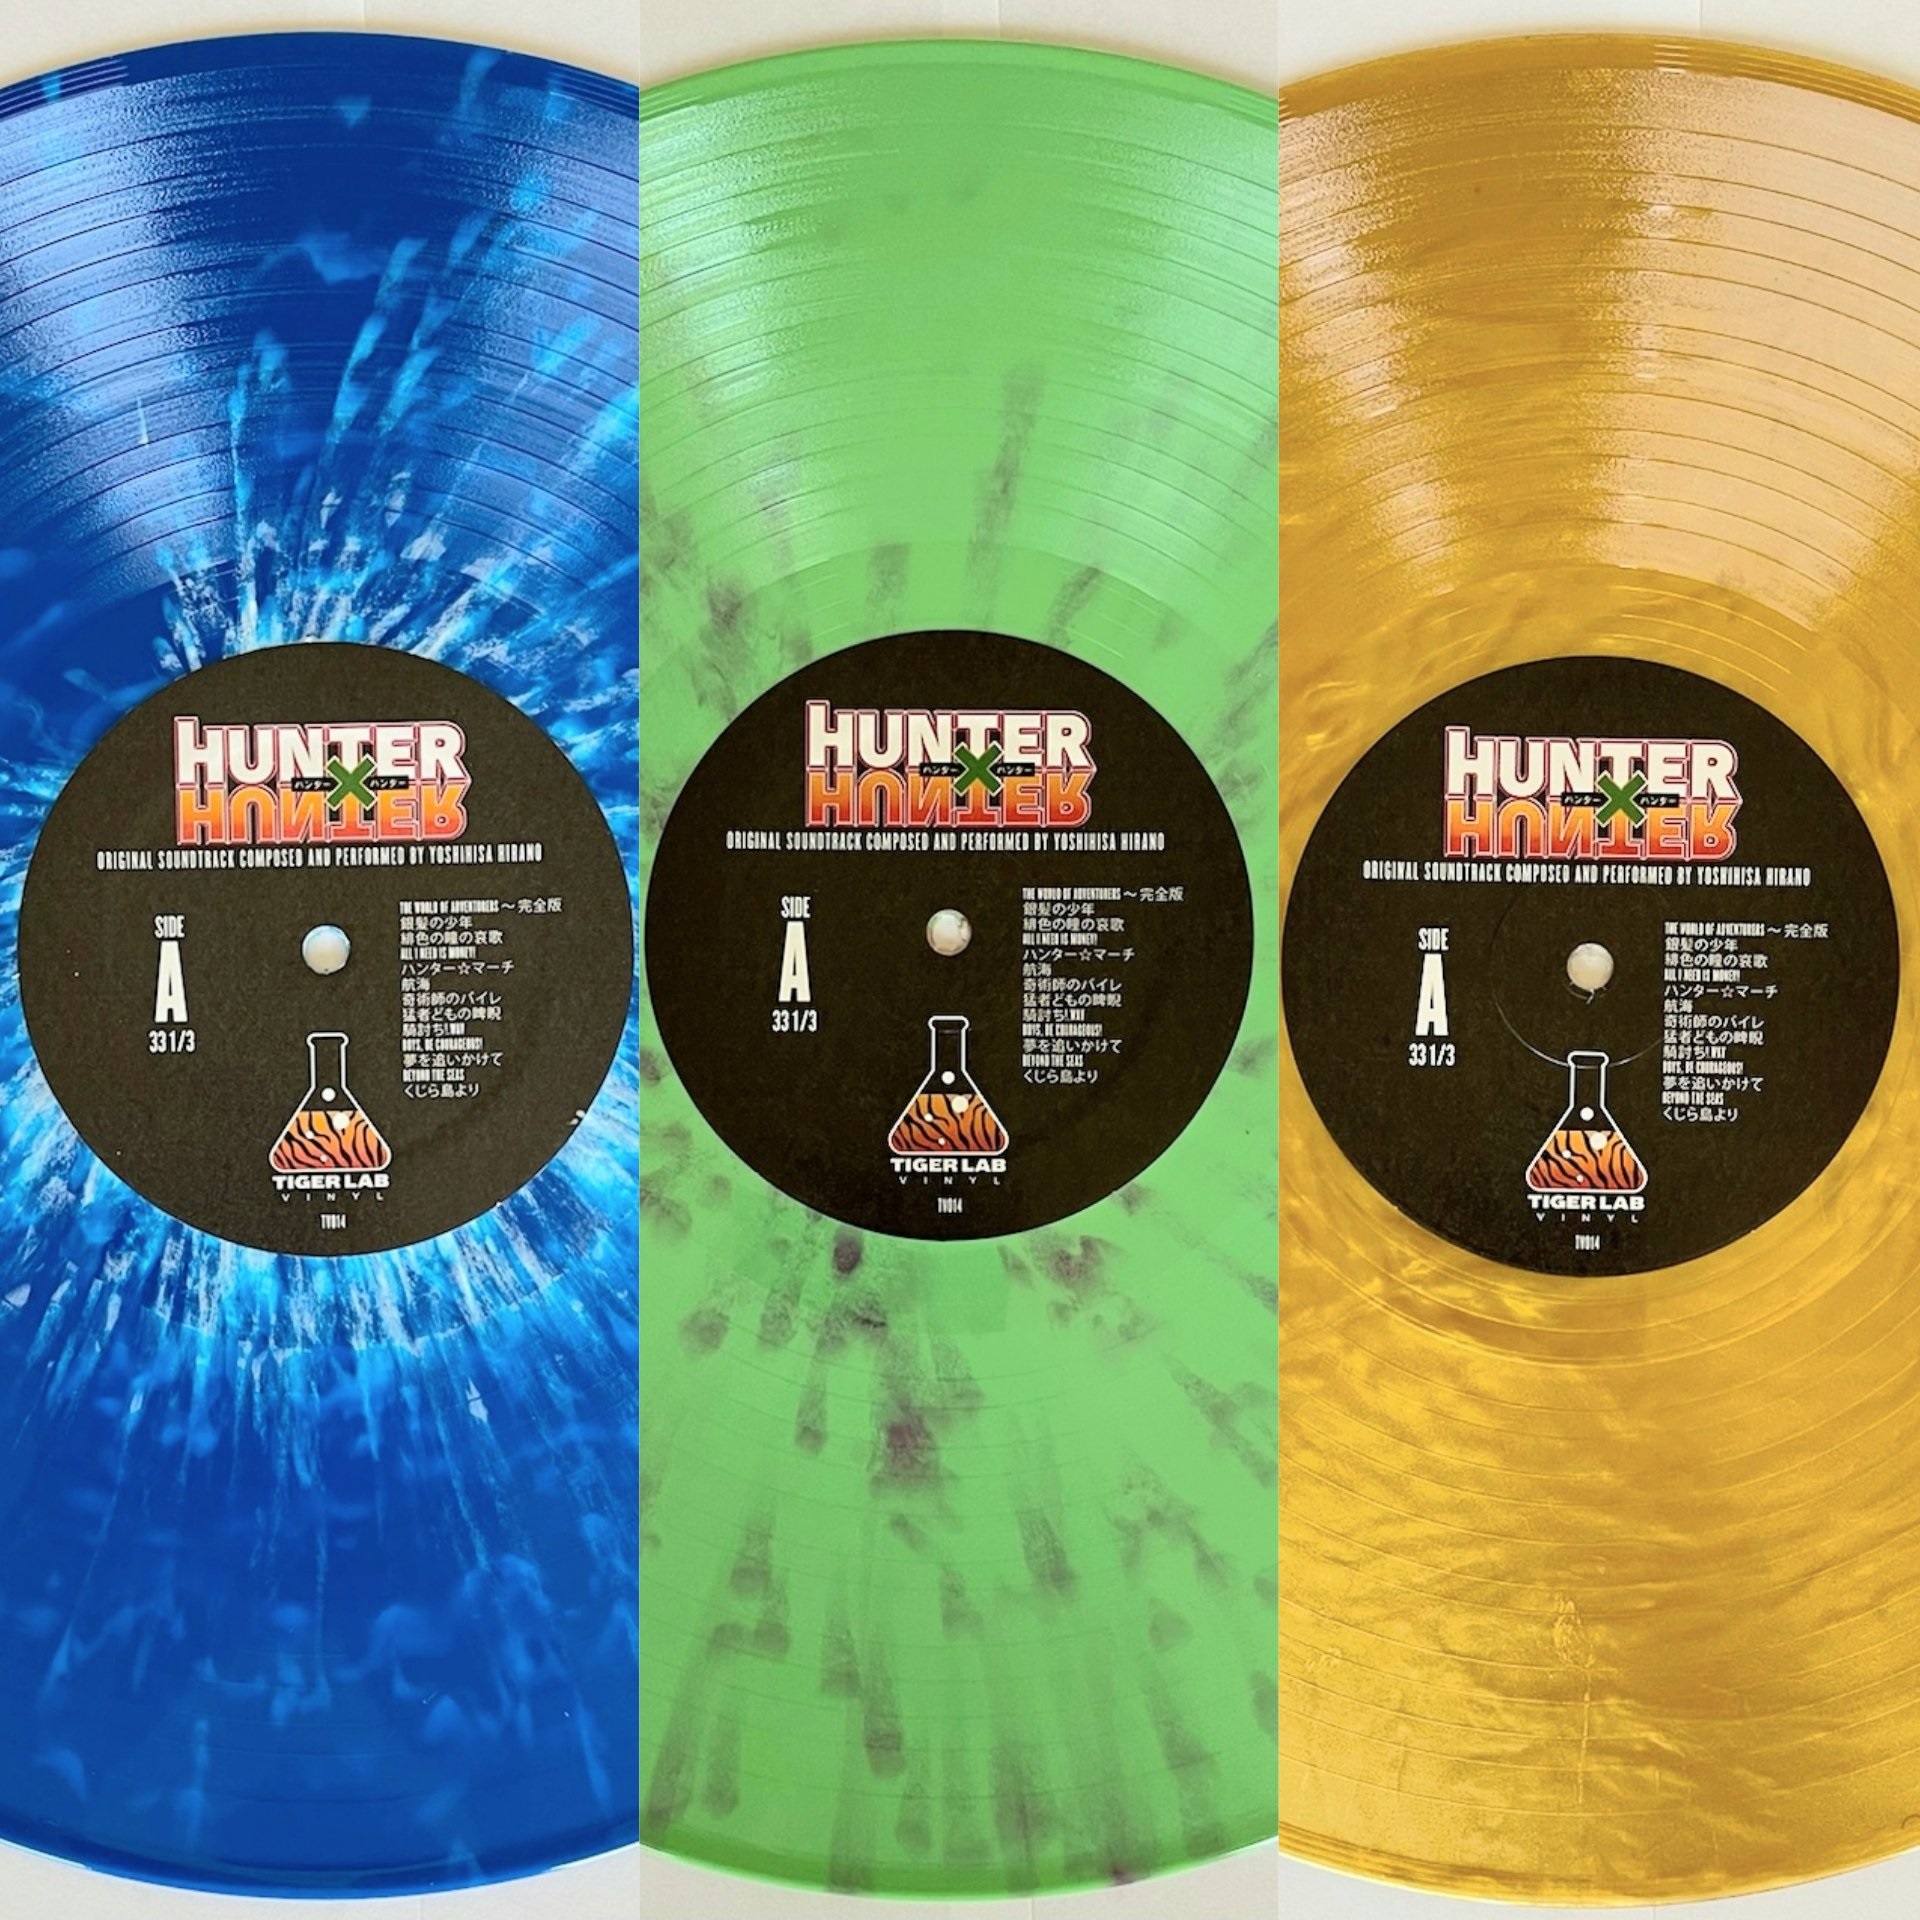 THE HUNTER (Crystal Green Vinyl Edition) - Impex Records